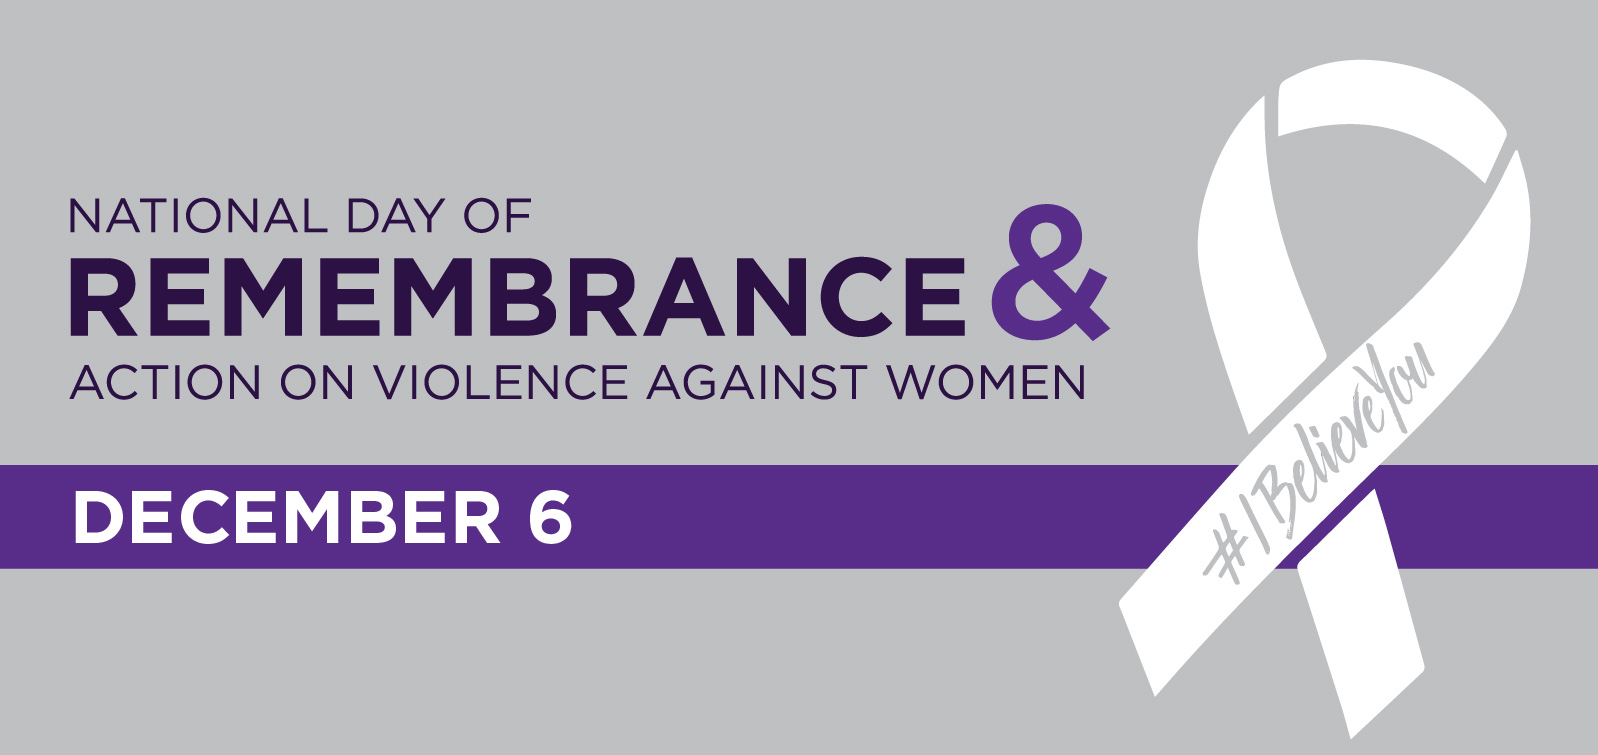 National Day of Remembrance & Action on Violence Against Women Logo